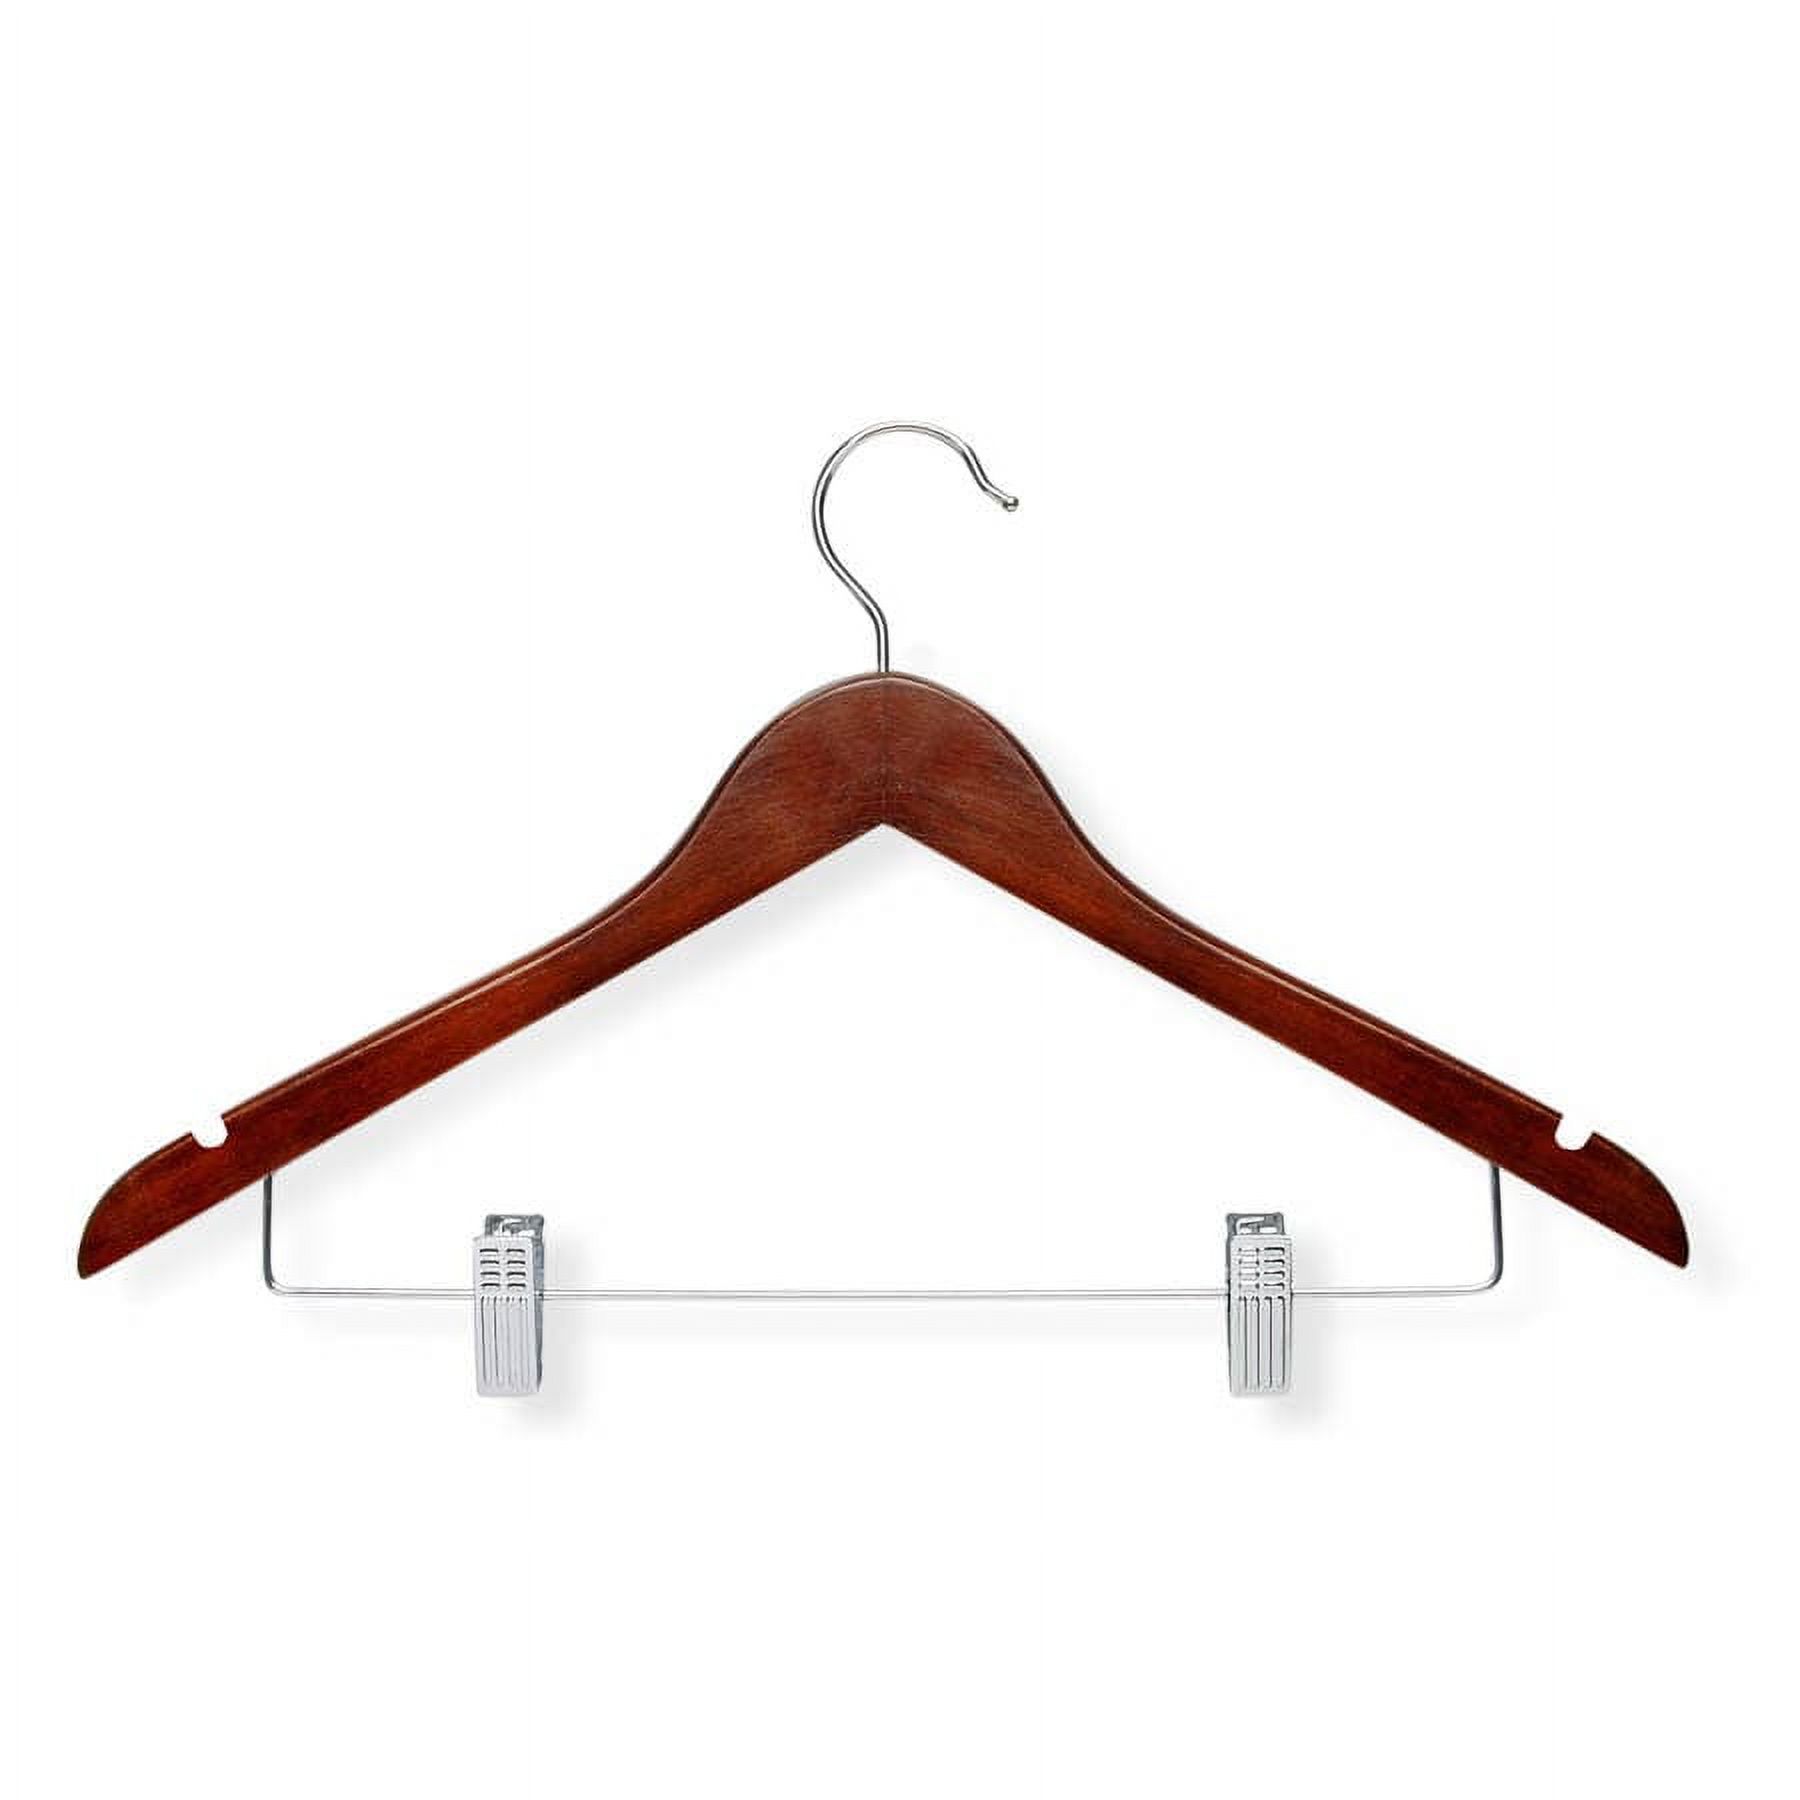 Honey Can Do Wood Suit Hanger with Clips, Cherry Finish (pack of 12) - image 2 of 5